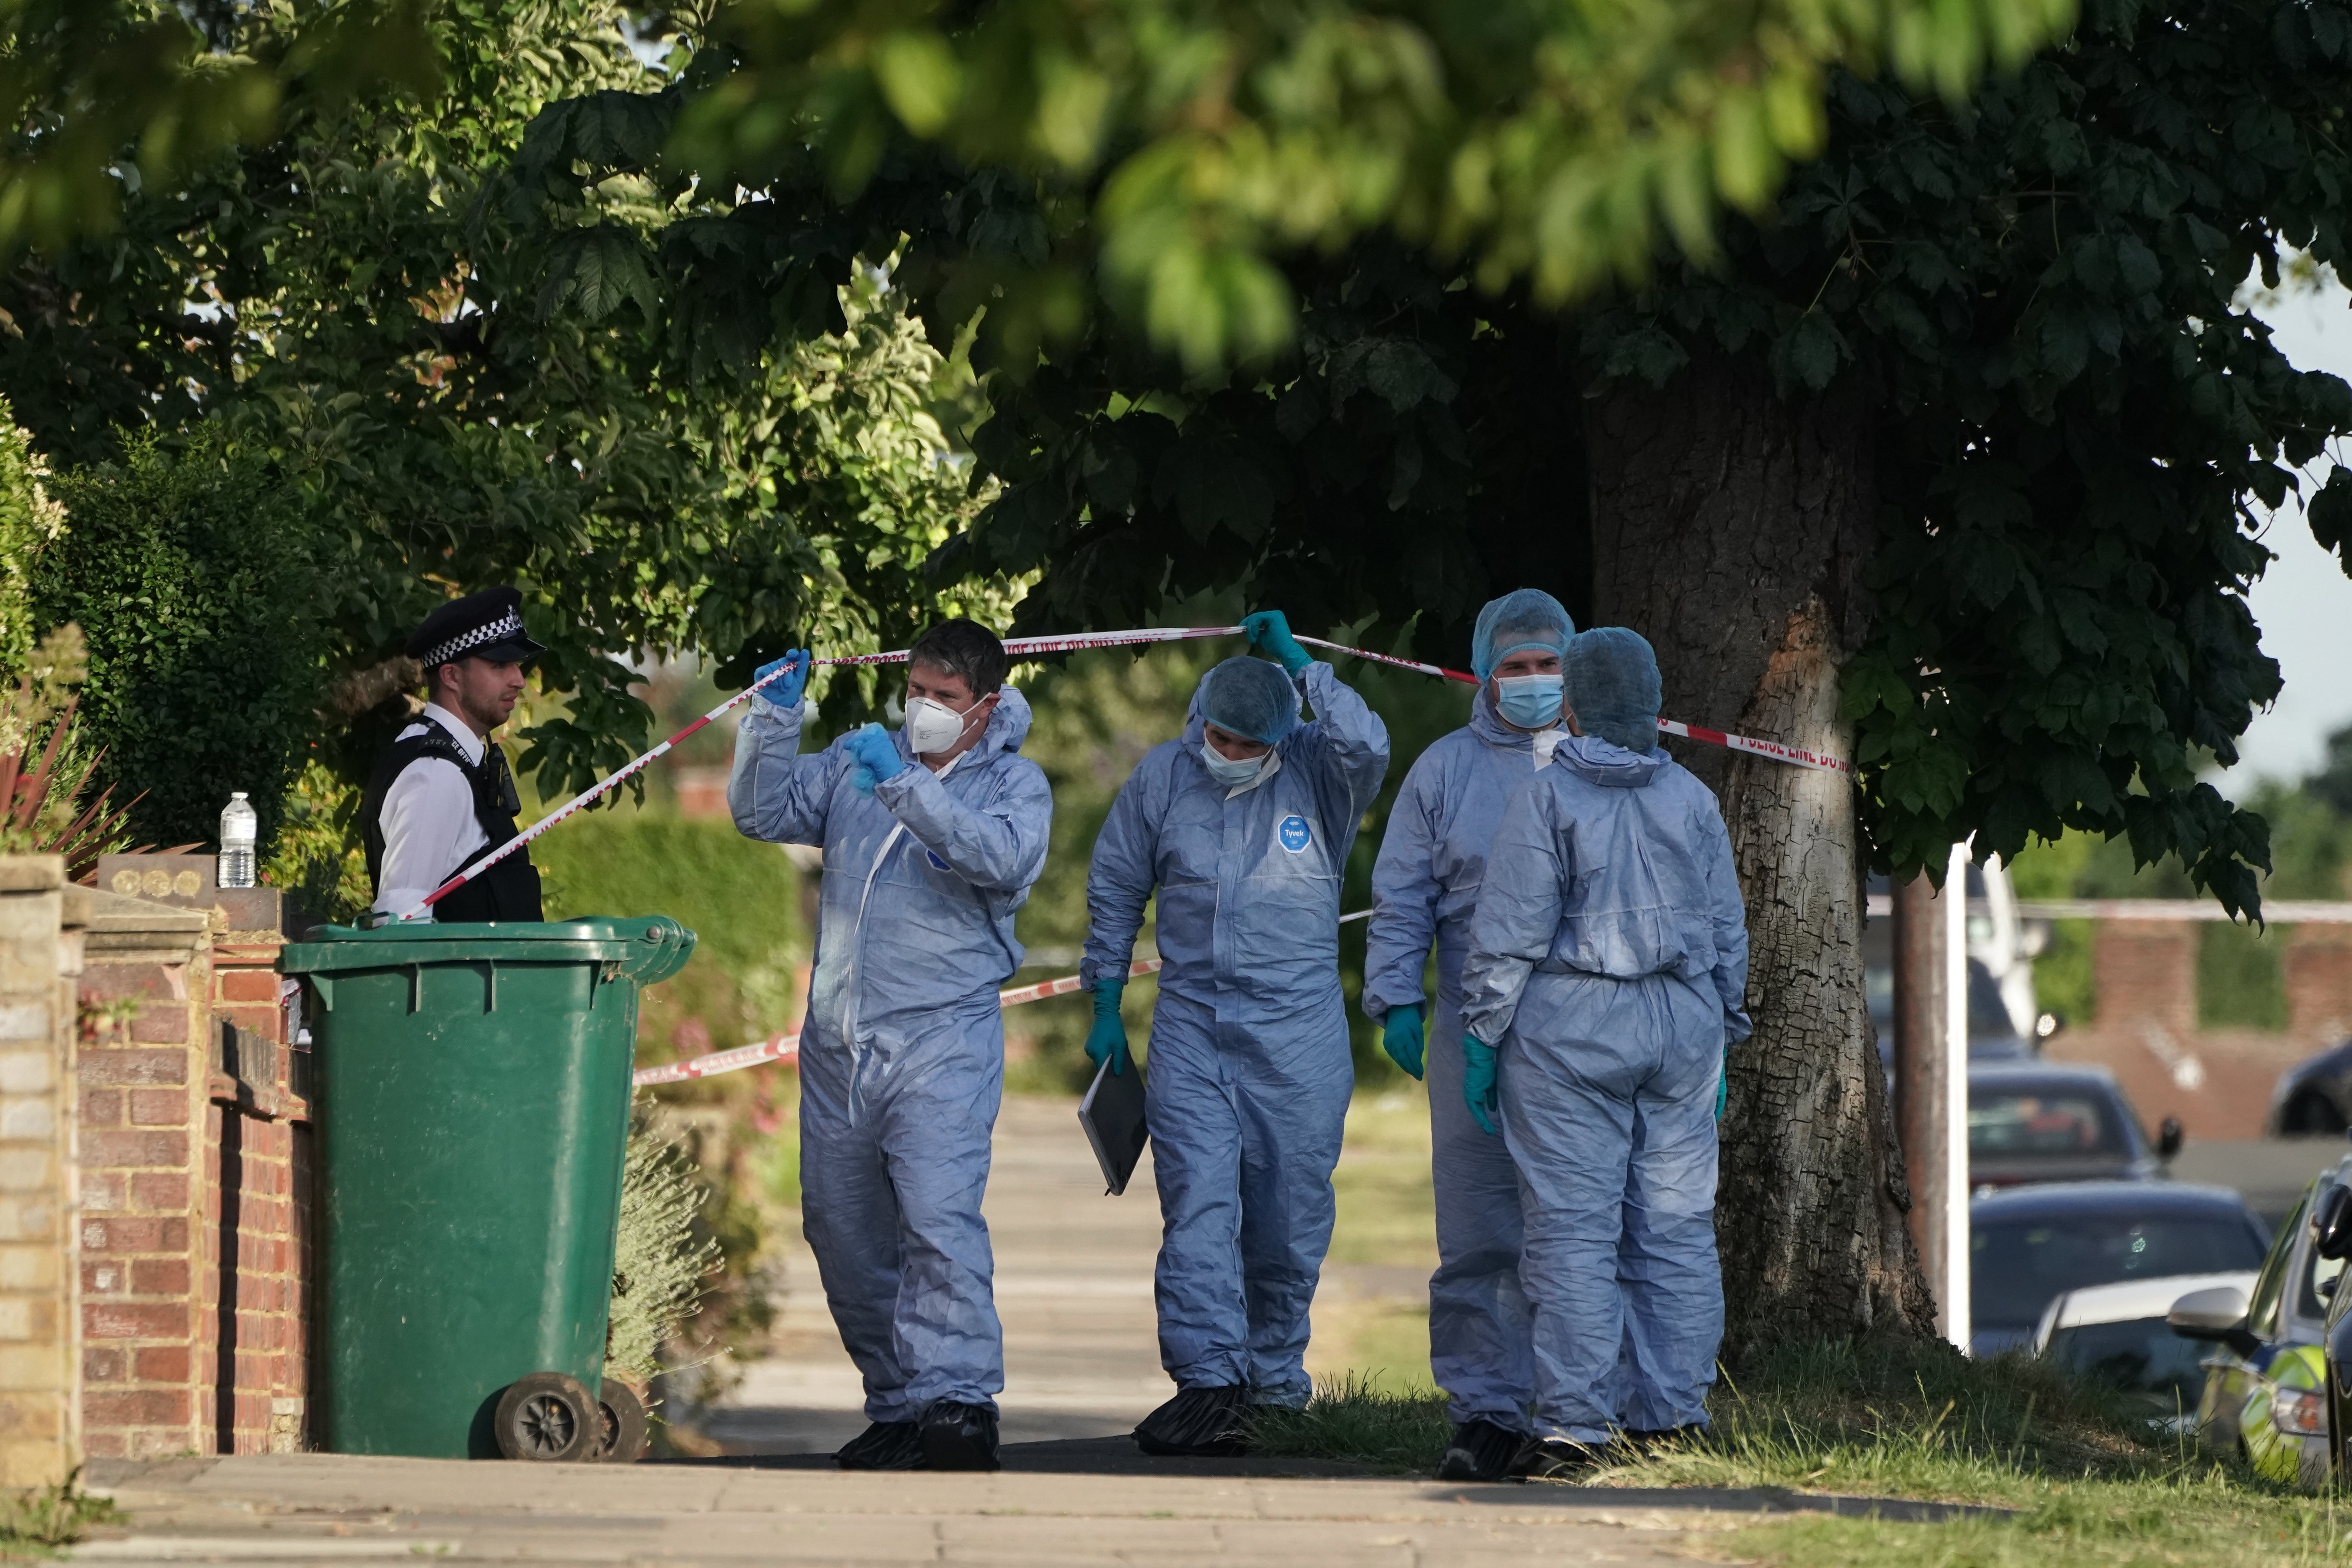 Police investigators at the scene of the incident in north London